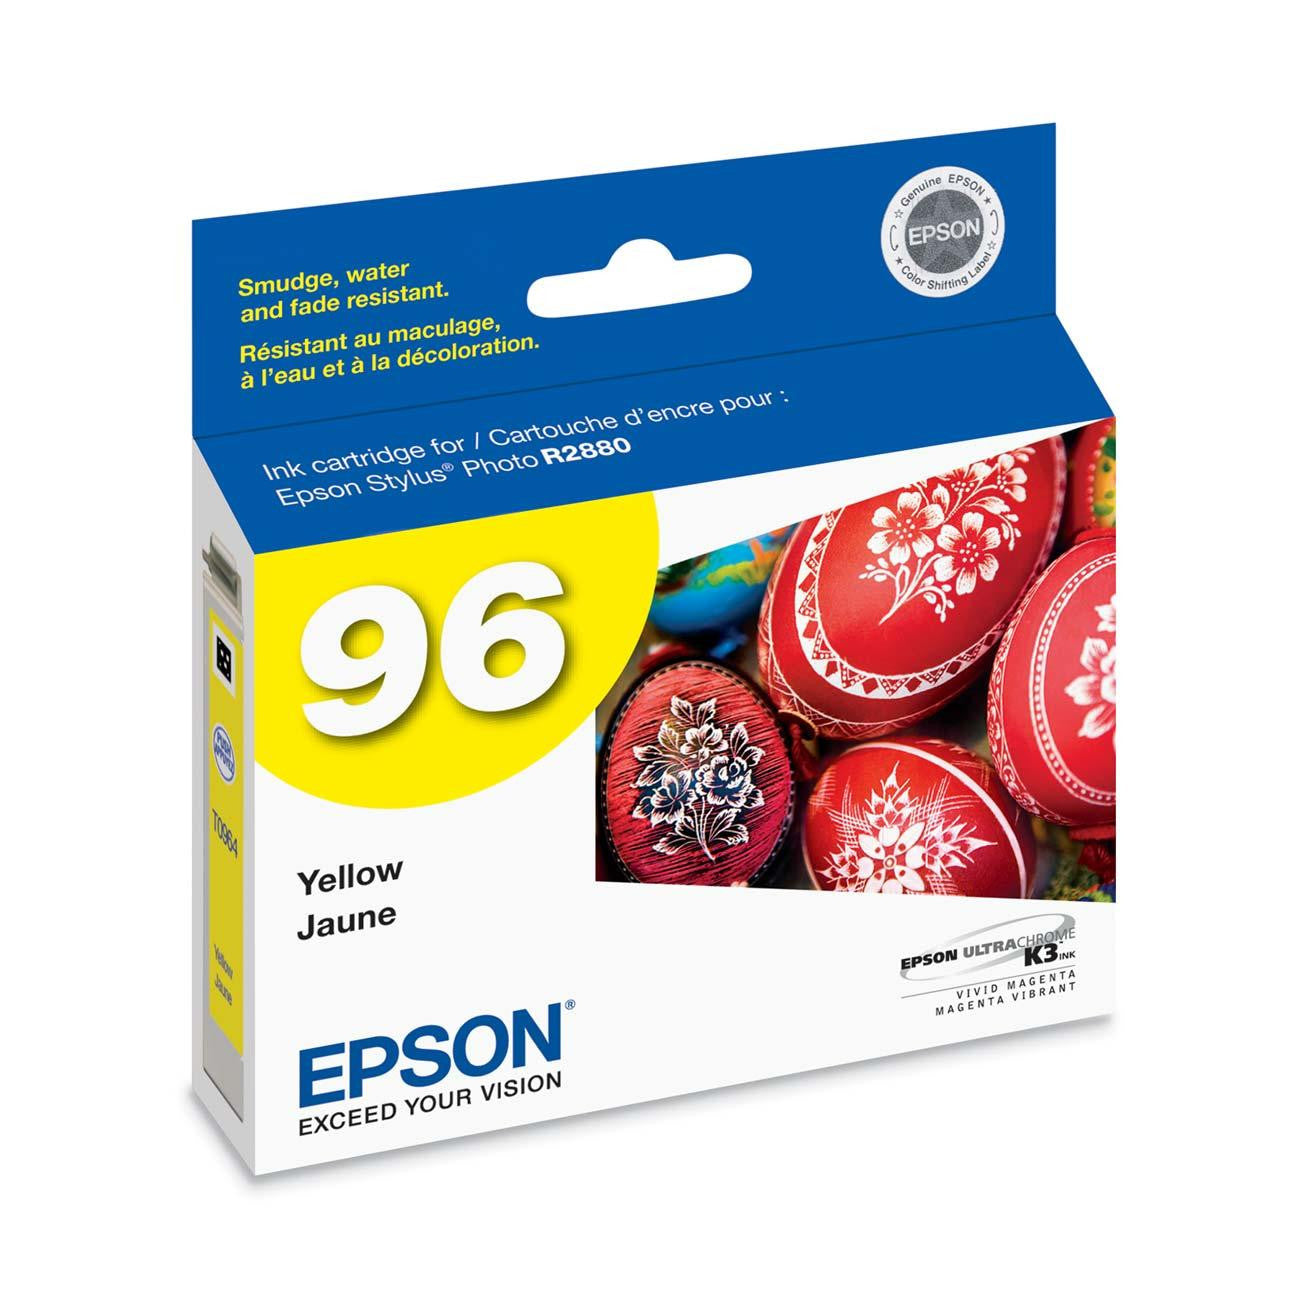 Epson T096420 R2880 Yellow Ink Cartridge (96), printers ink small format, Epson - Pictureline 